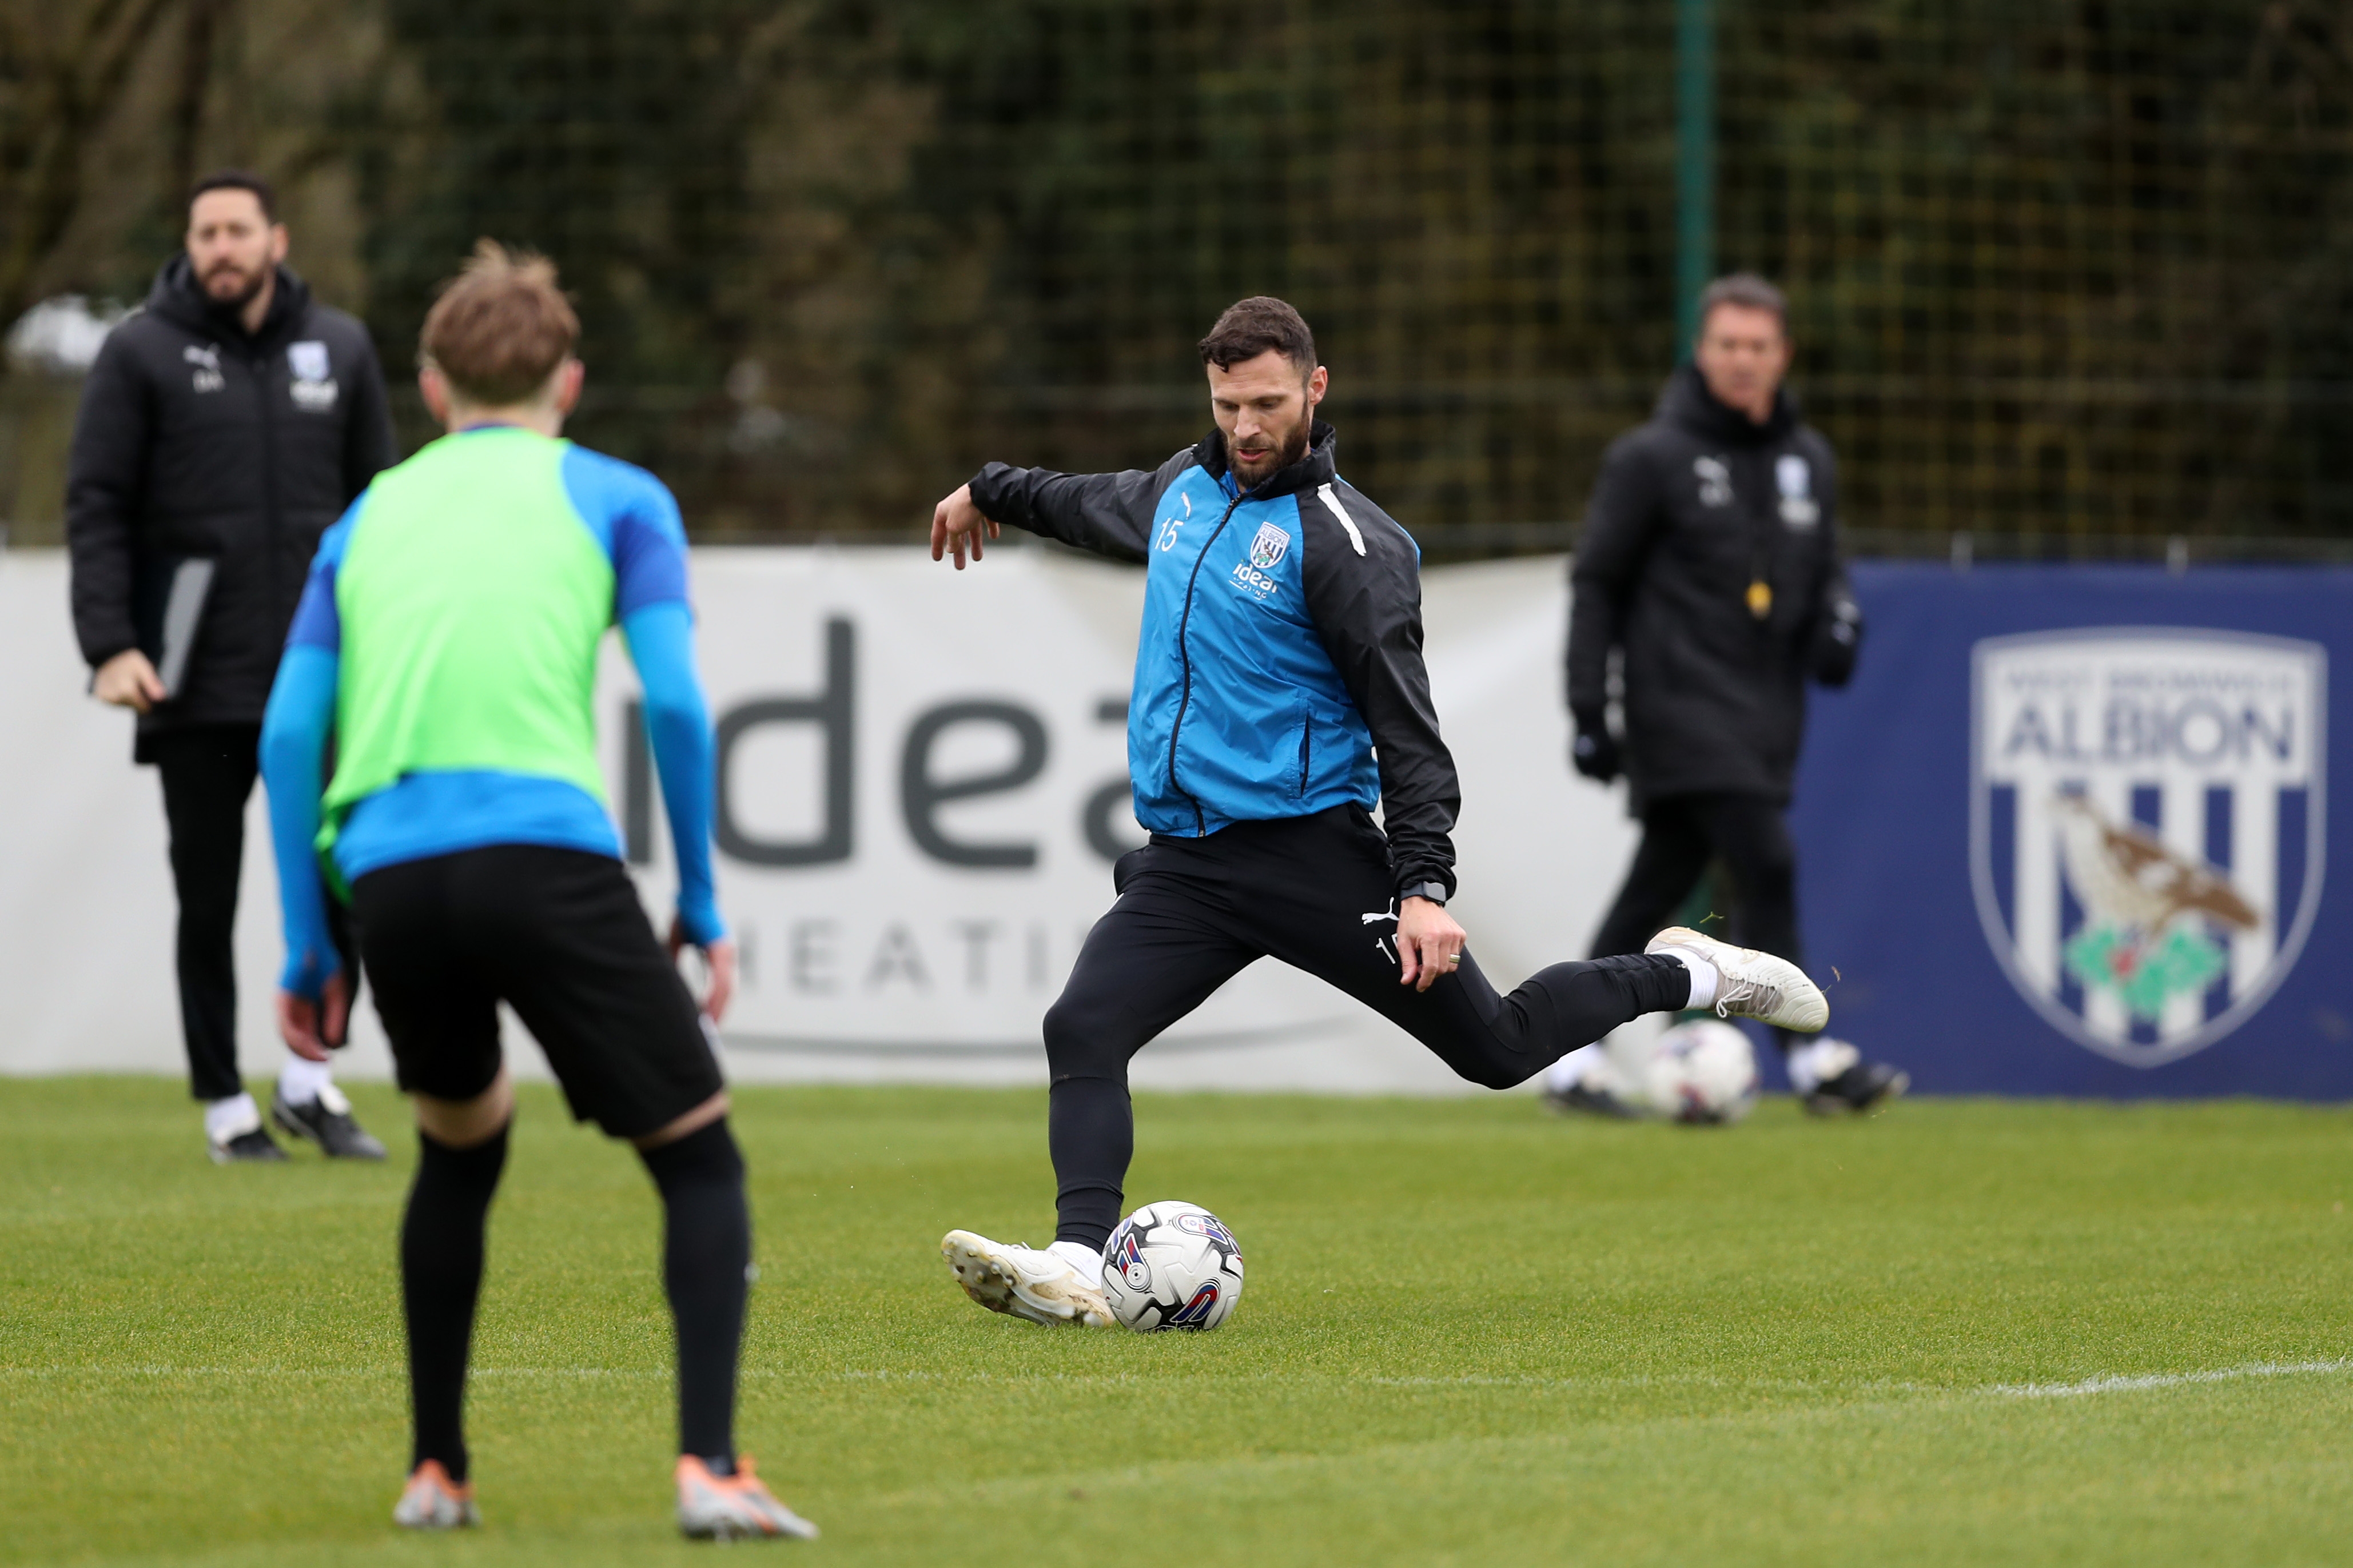 Erik Pieters striking the ball during a training session